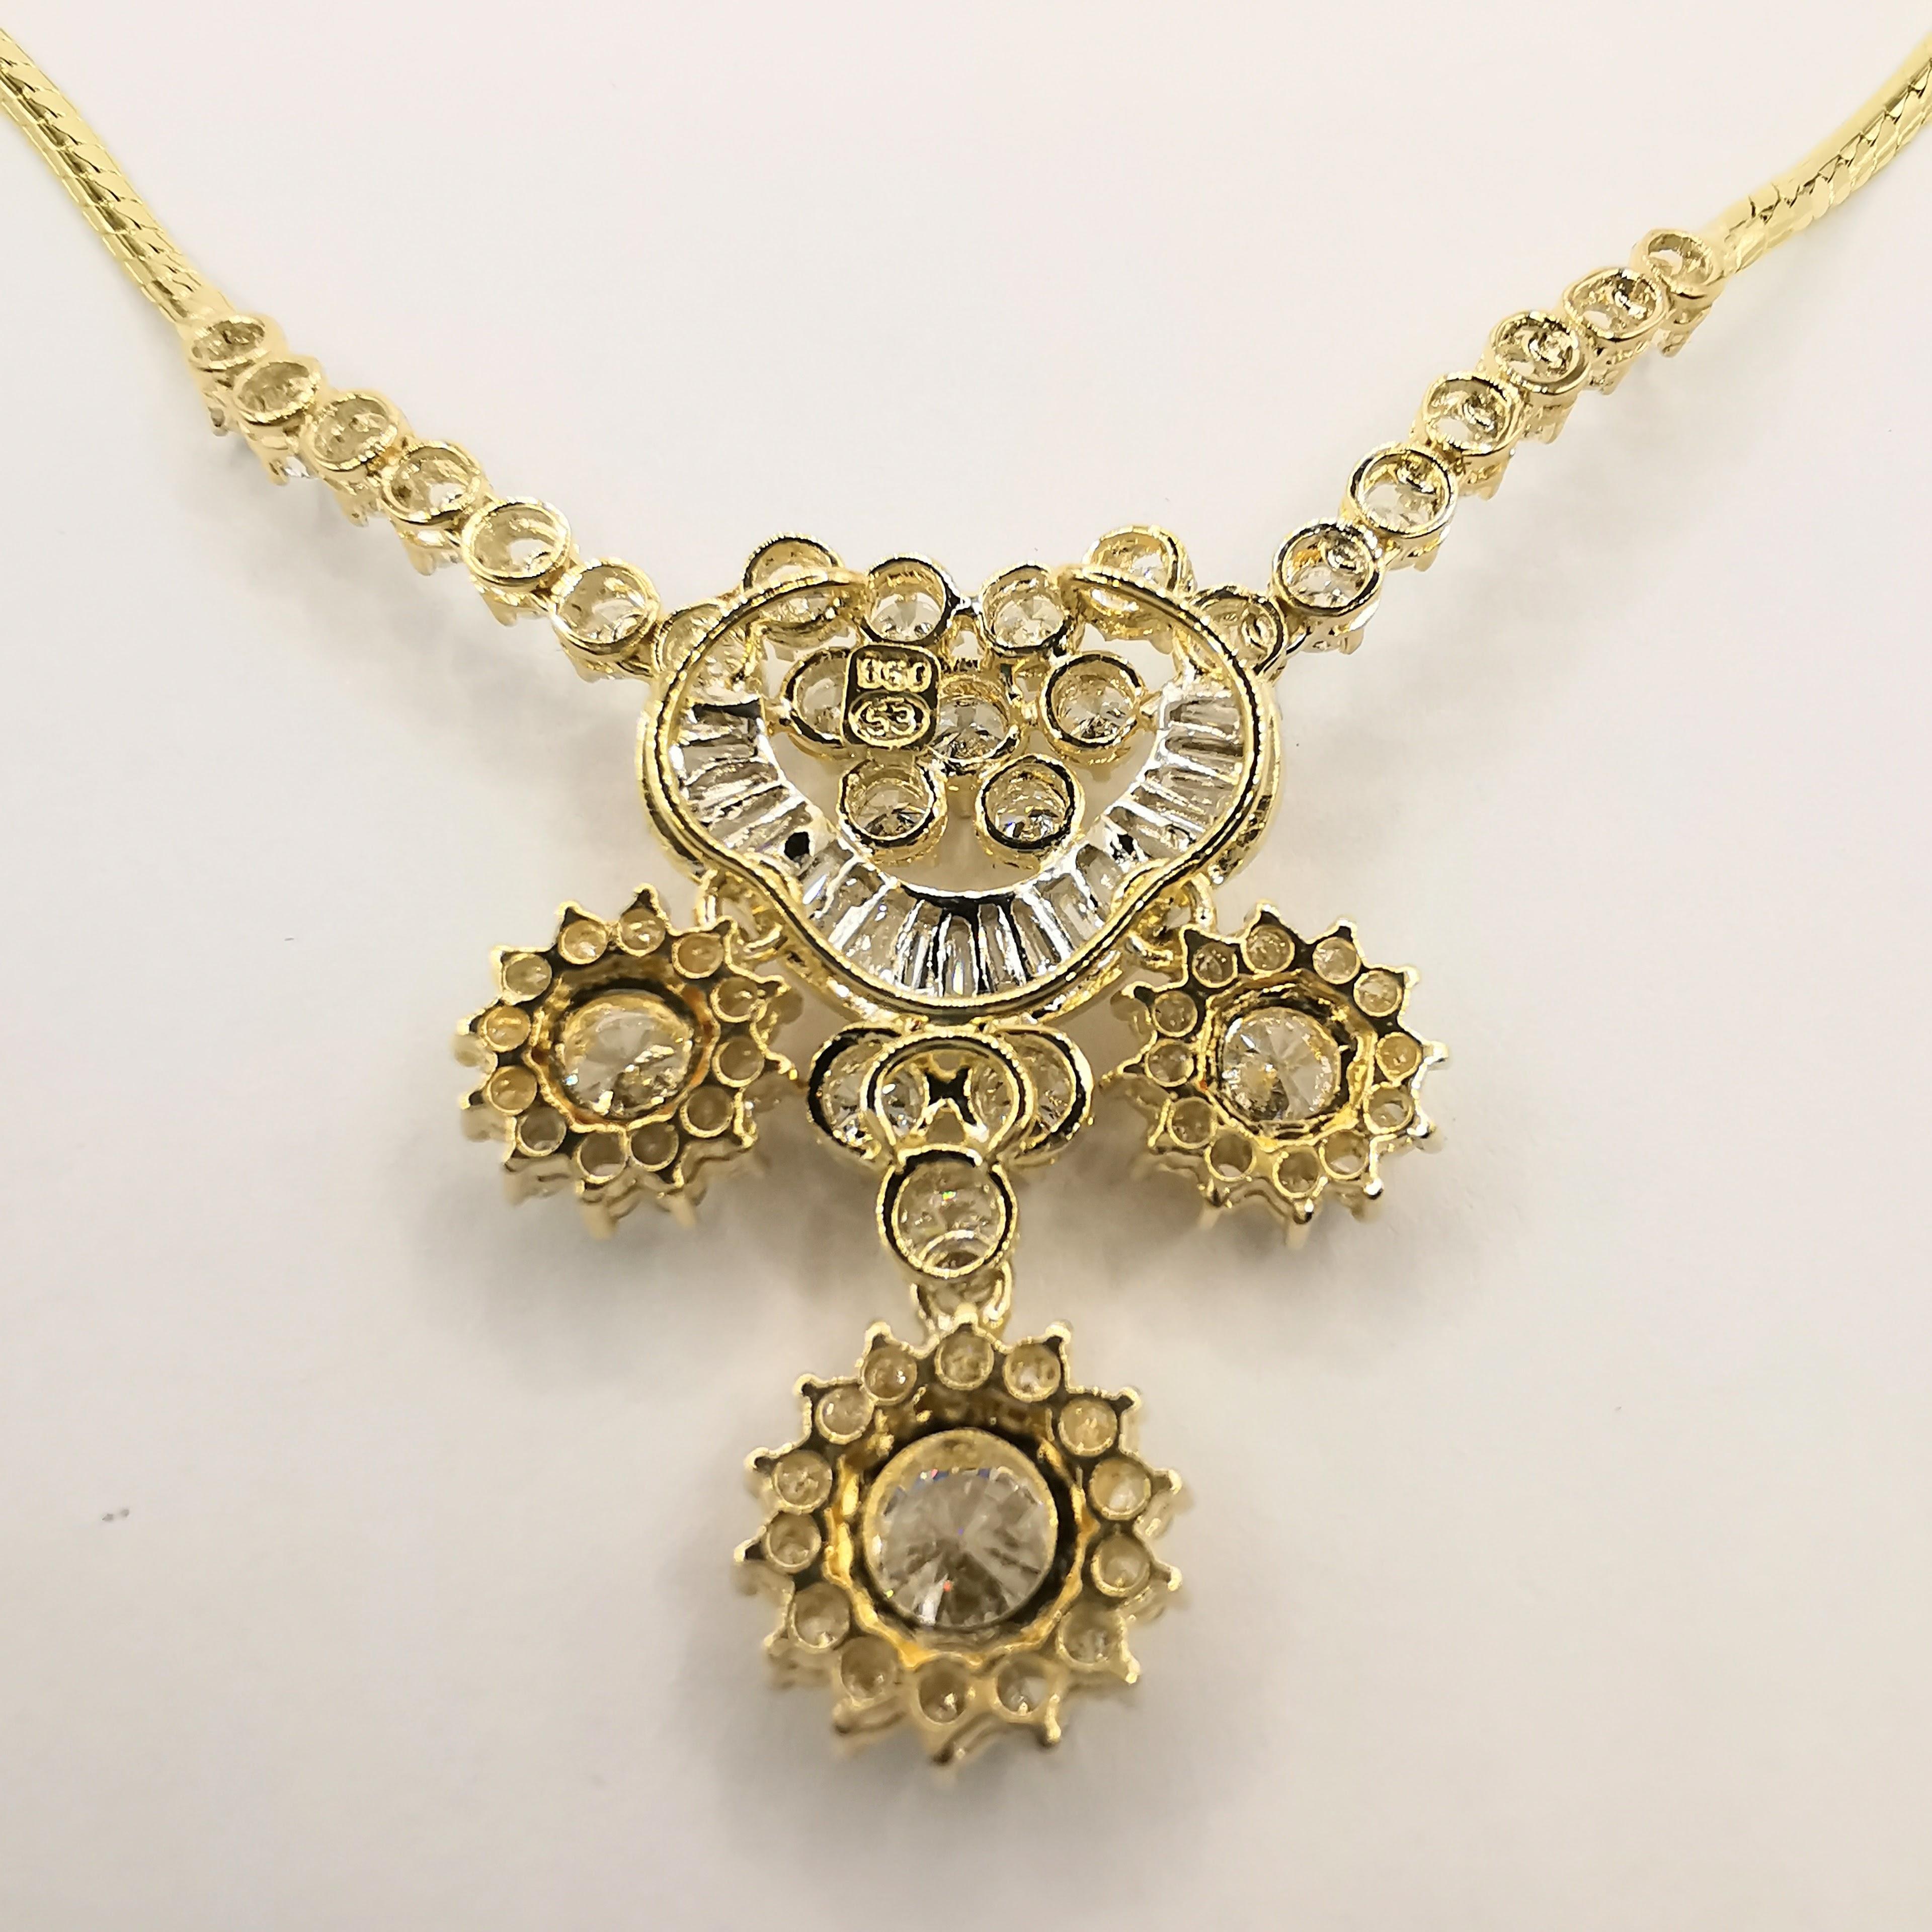 Round Cut Vintage 3.19 Carat Diamond Necklace in 18-20k Yellow Gold For Sale